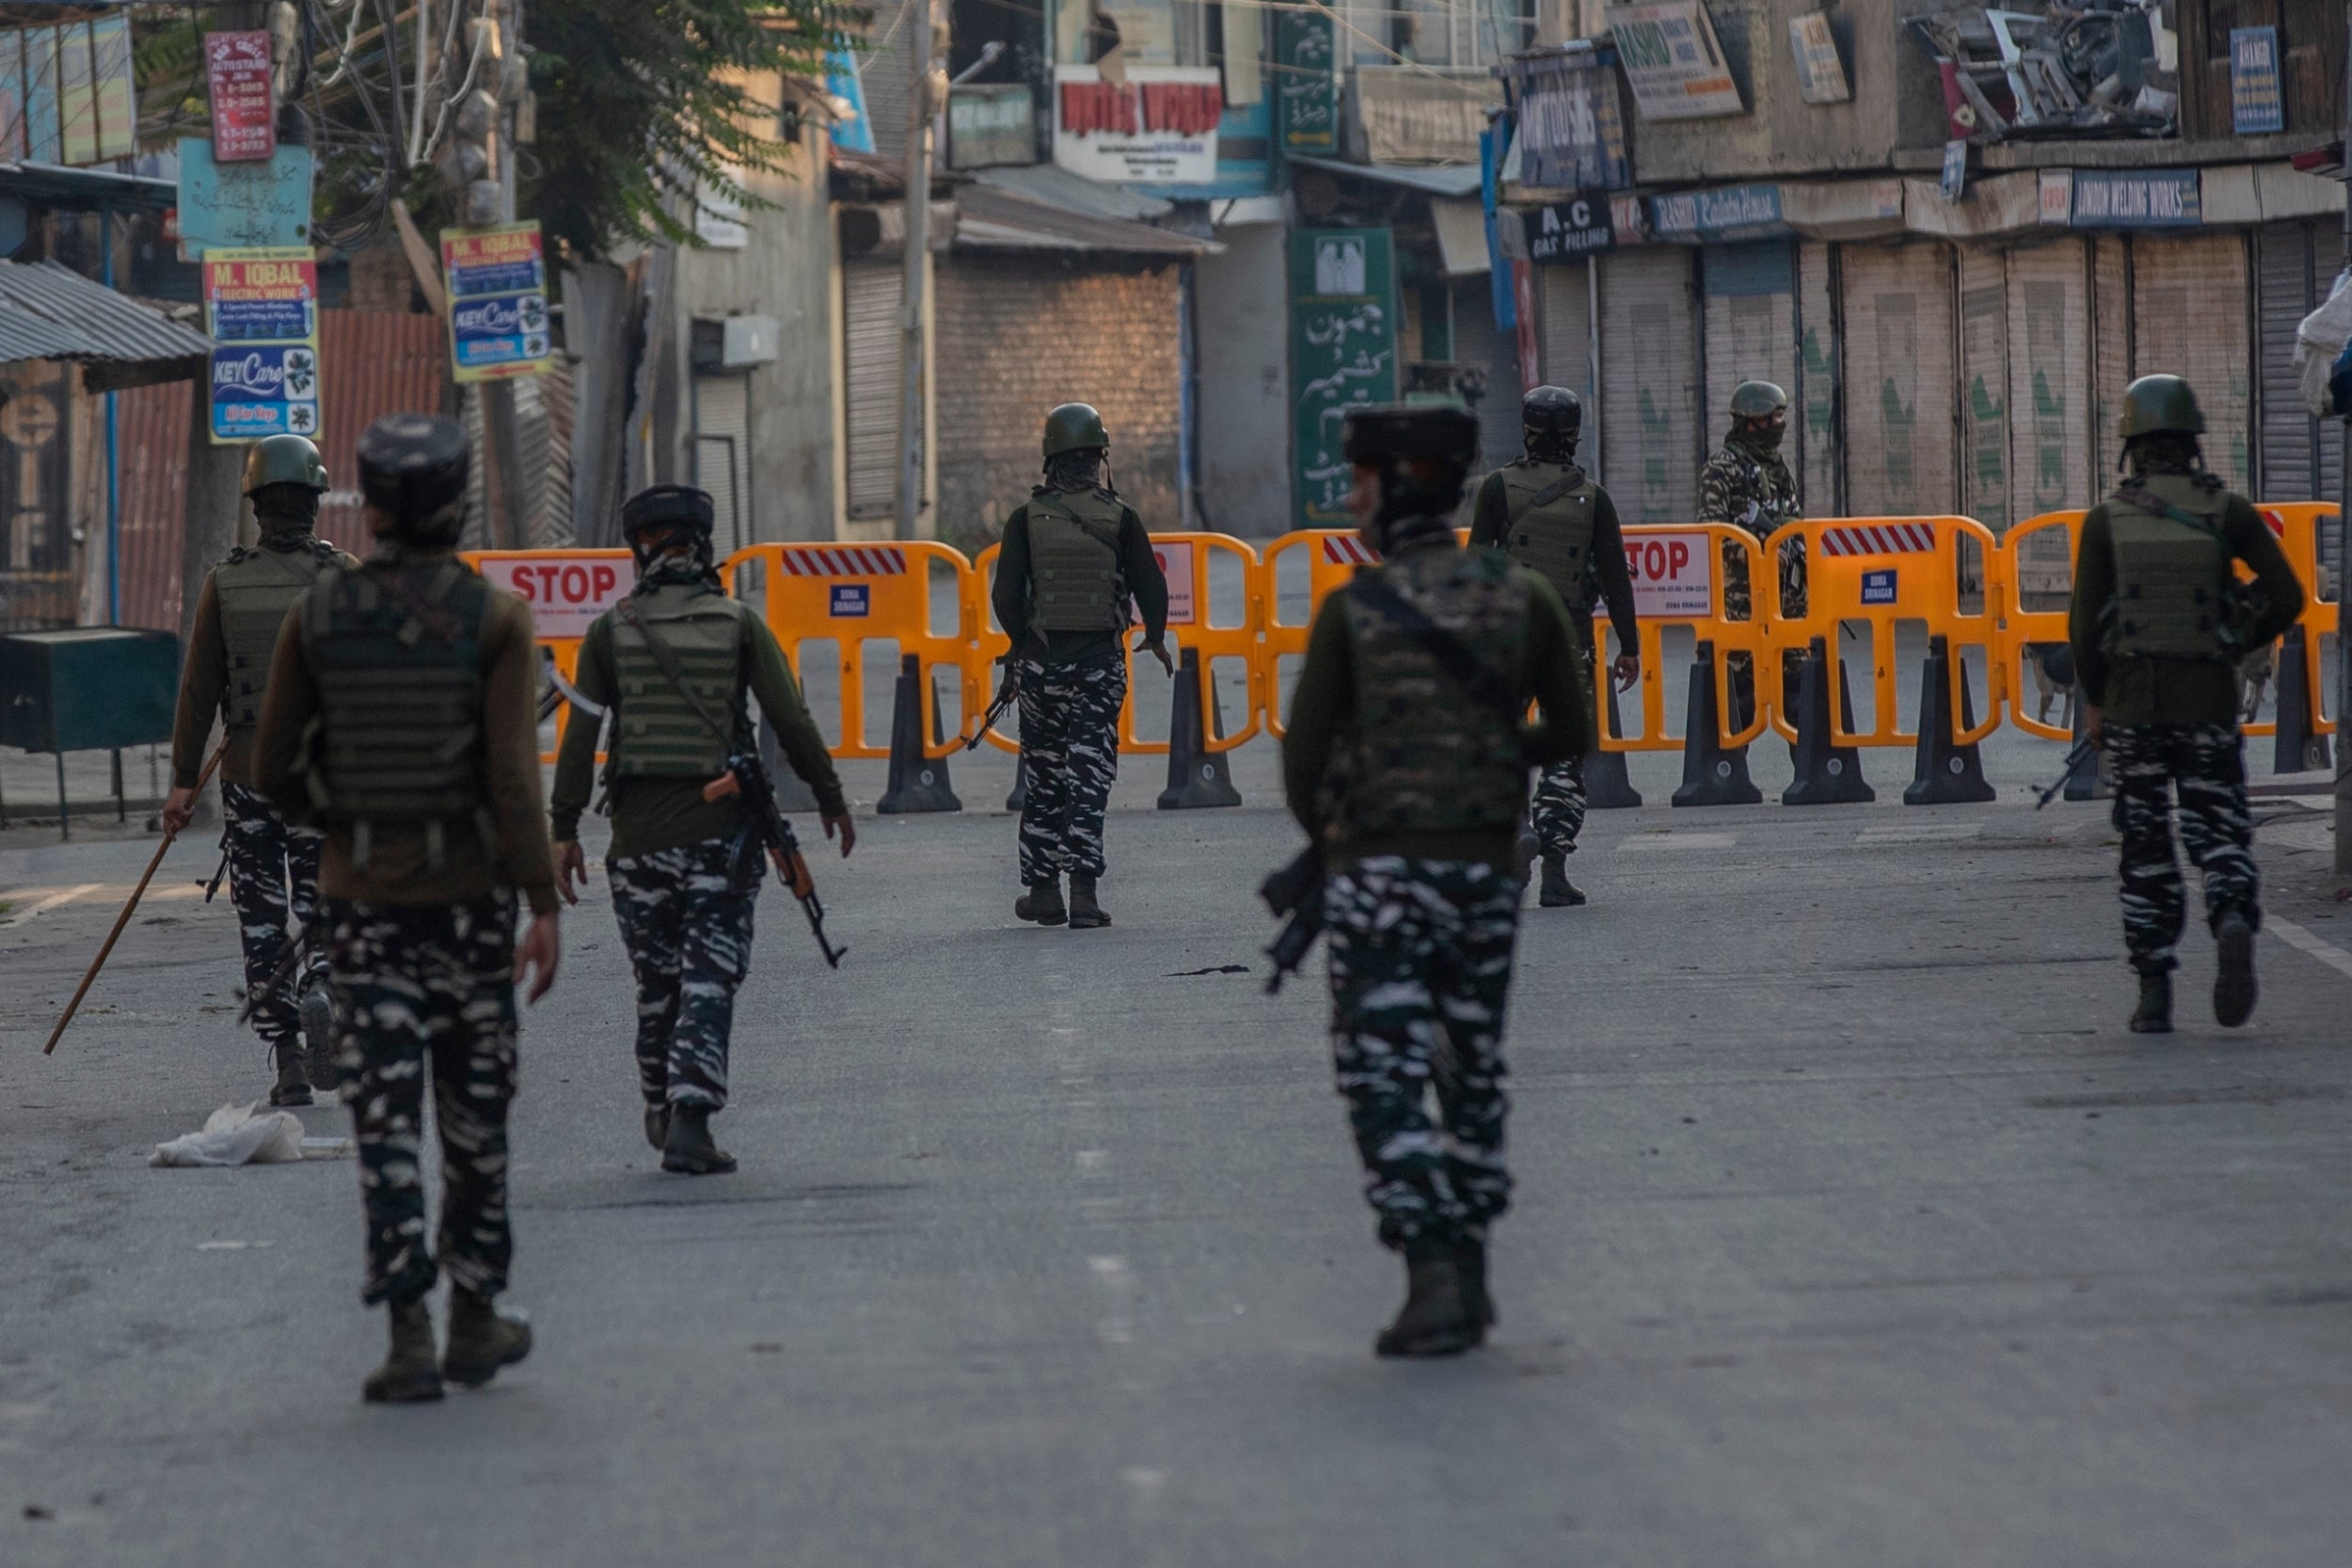 Paramilitary soldiers patrol a deserted street on the first anniversary of India’s decision to revoke the disputed region’s semi-autonomy, in Srinagar on Wednesday